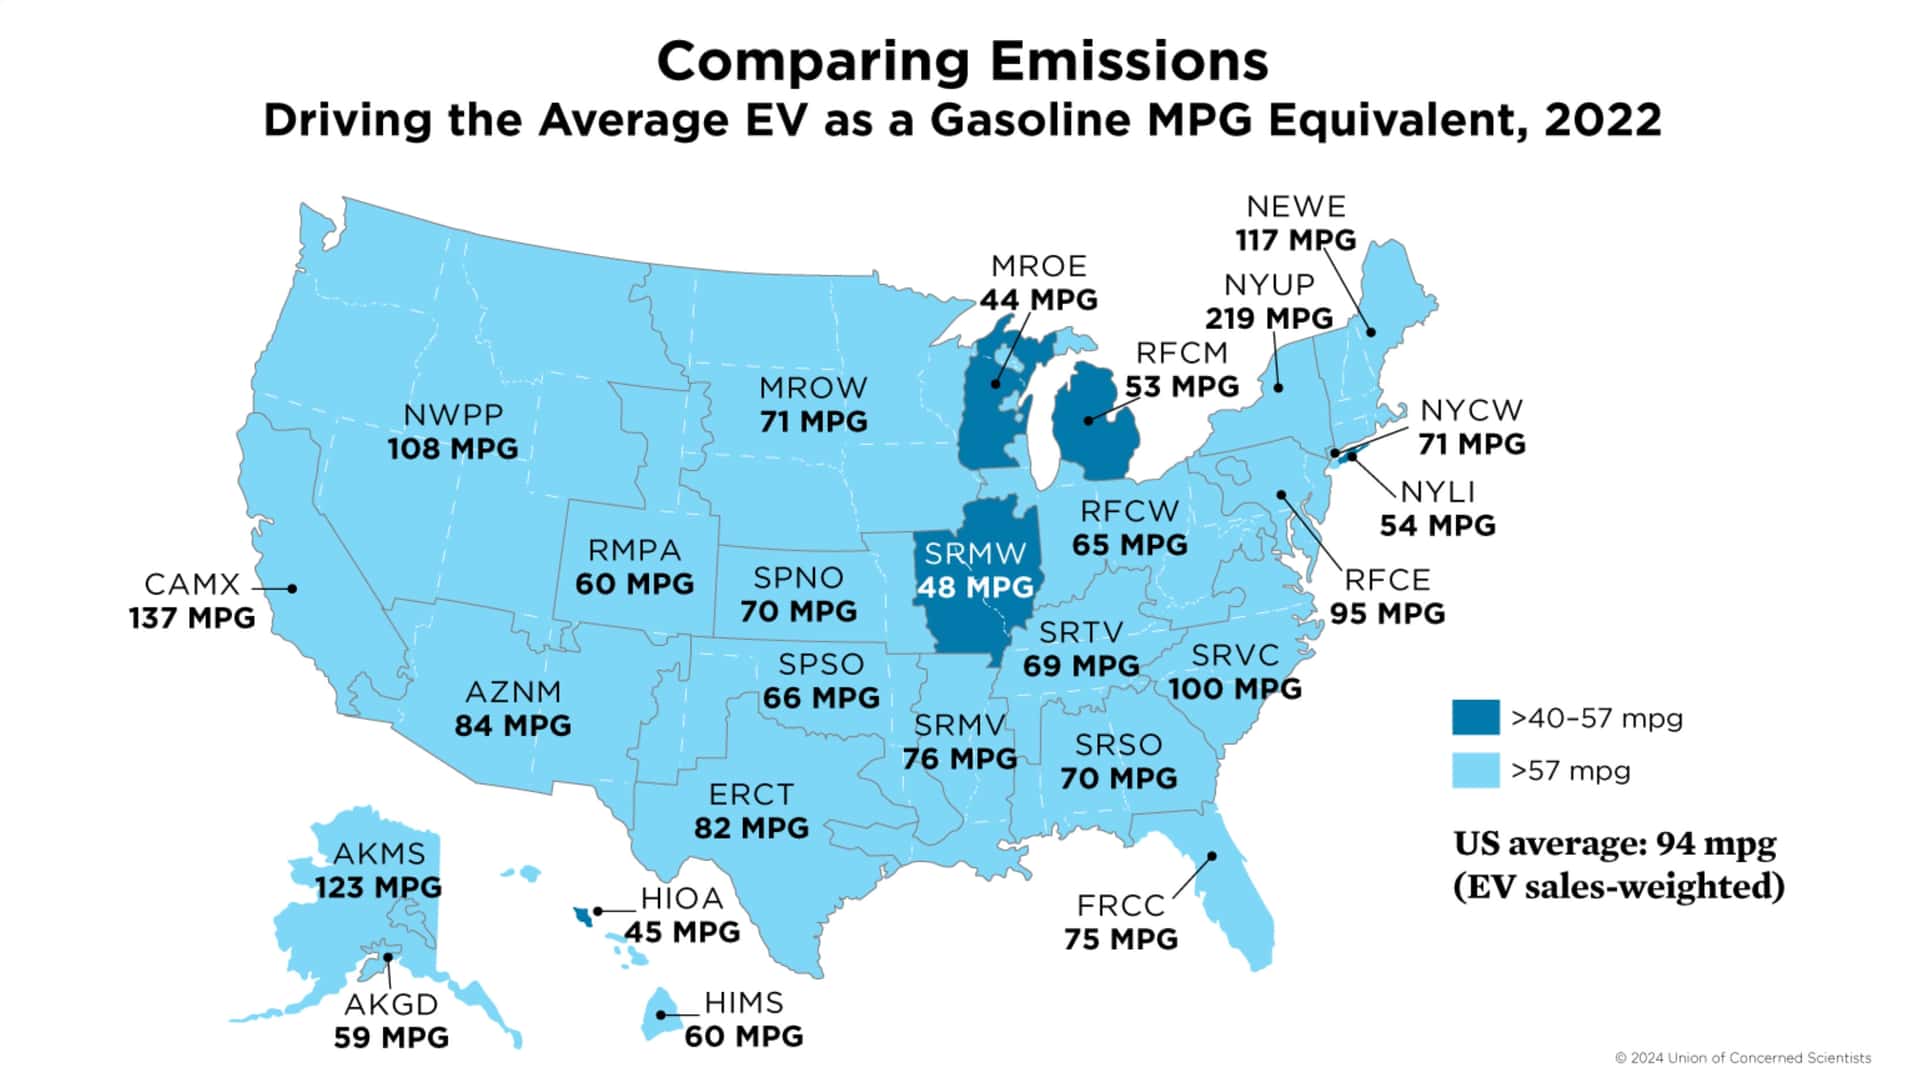 Comparing Emissions Driving EVs as a Gasoline MPG Equivalent, 2022